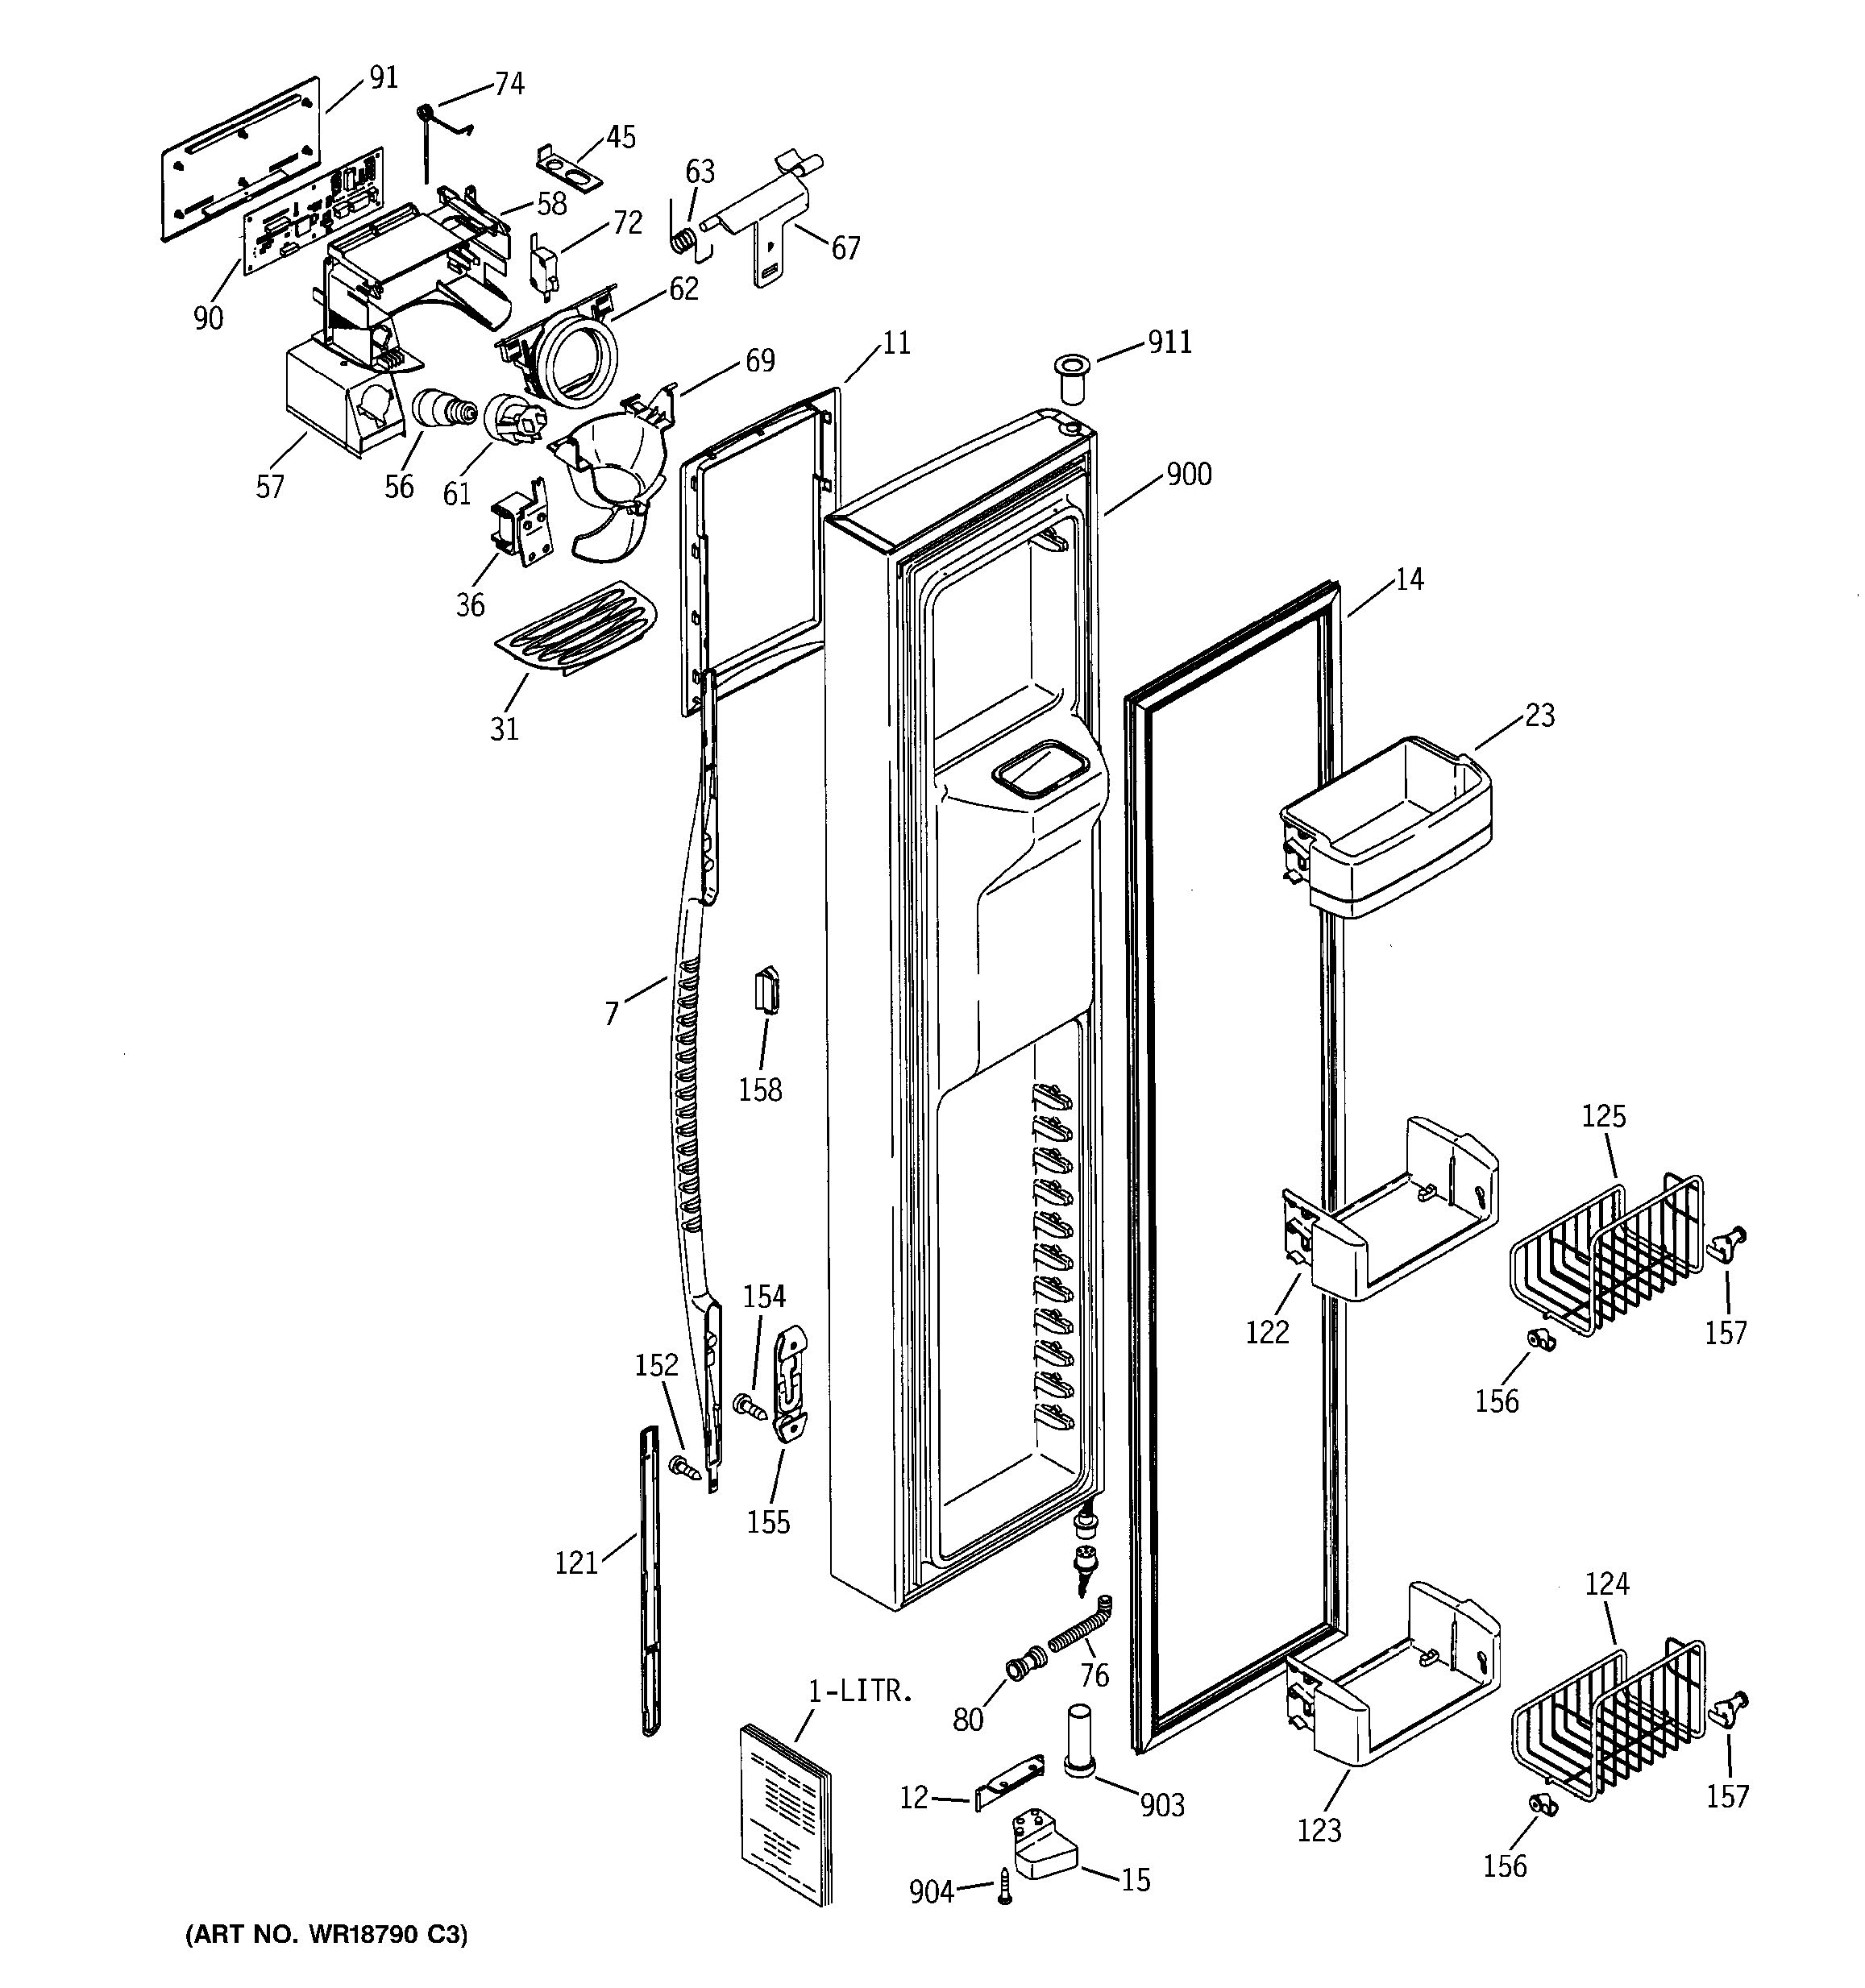 Assembly View For Freezer Door